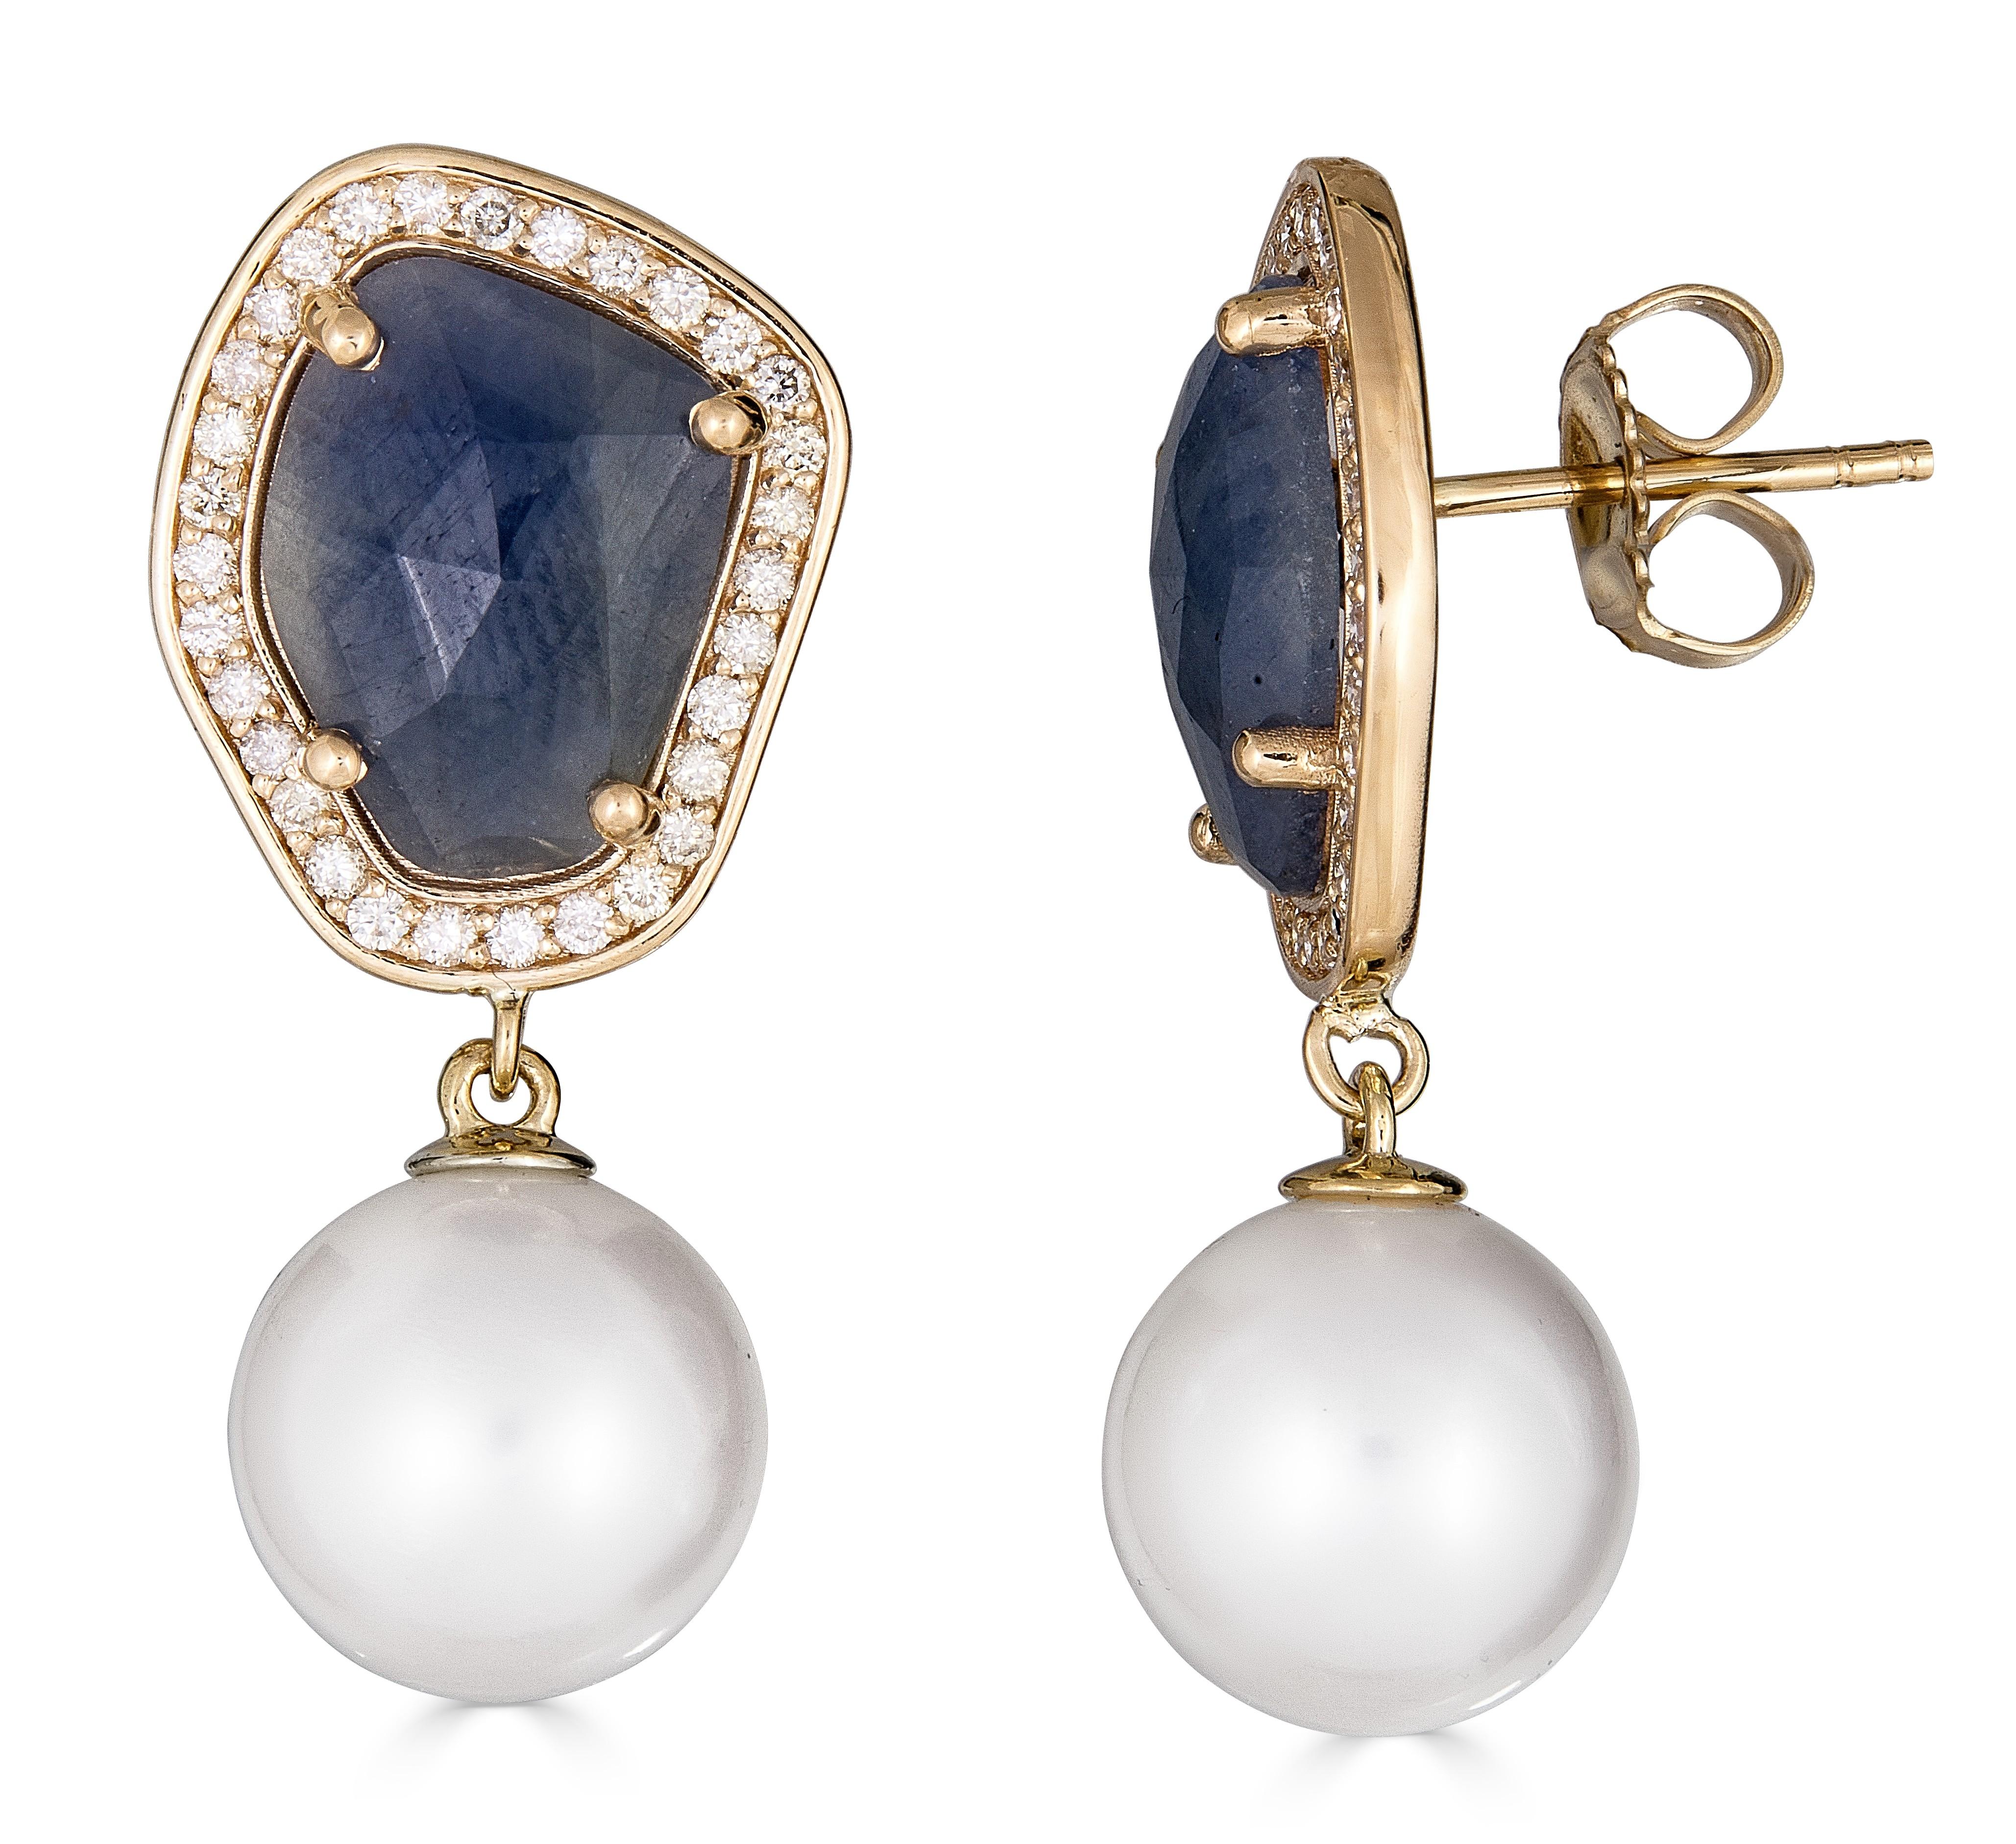 These one-of-a-kind earrings are designed to emphasize the wild and raw beauty of the natural sapphires, combined with the natural elegance of freshwater pearls.

Each earring features a lustrous, 11-13mm freshwater pearl suspended from a